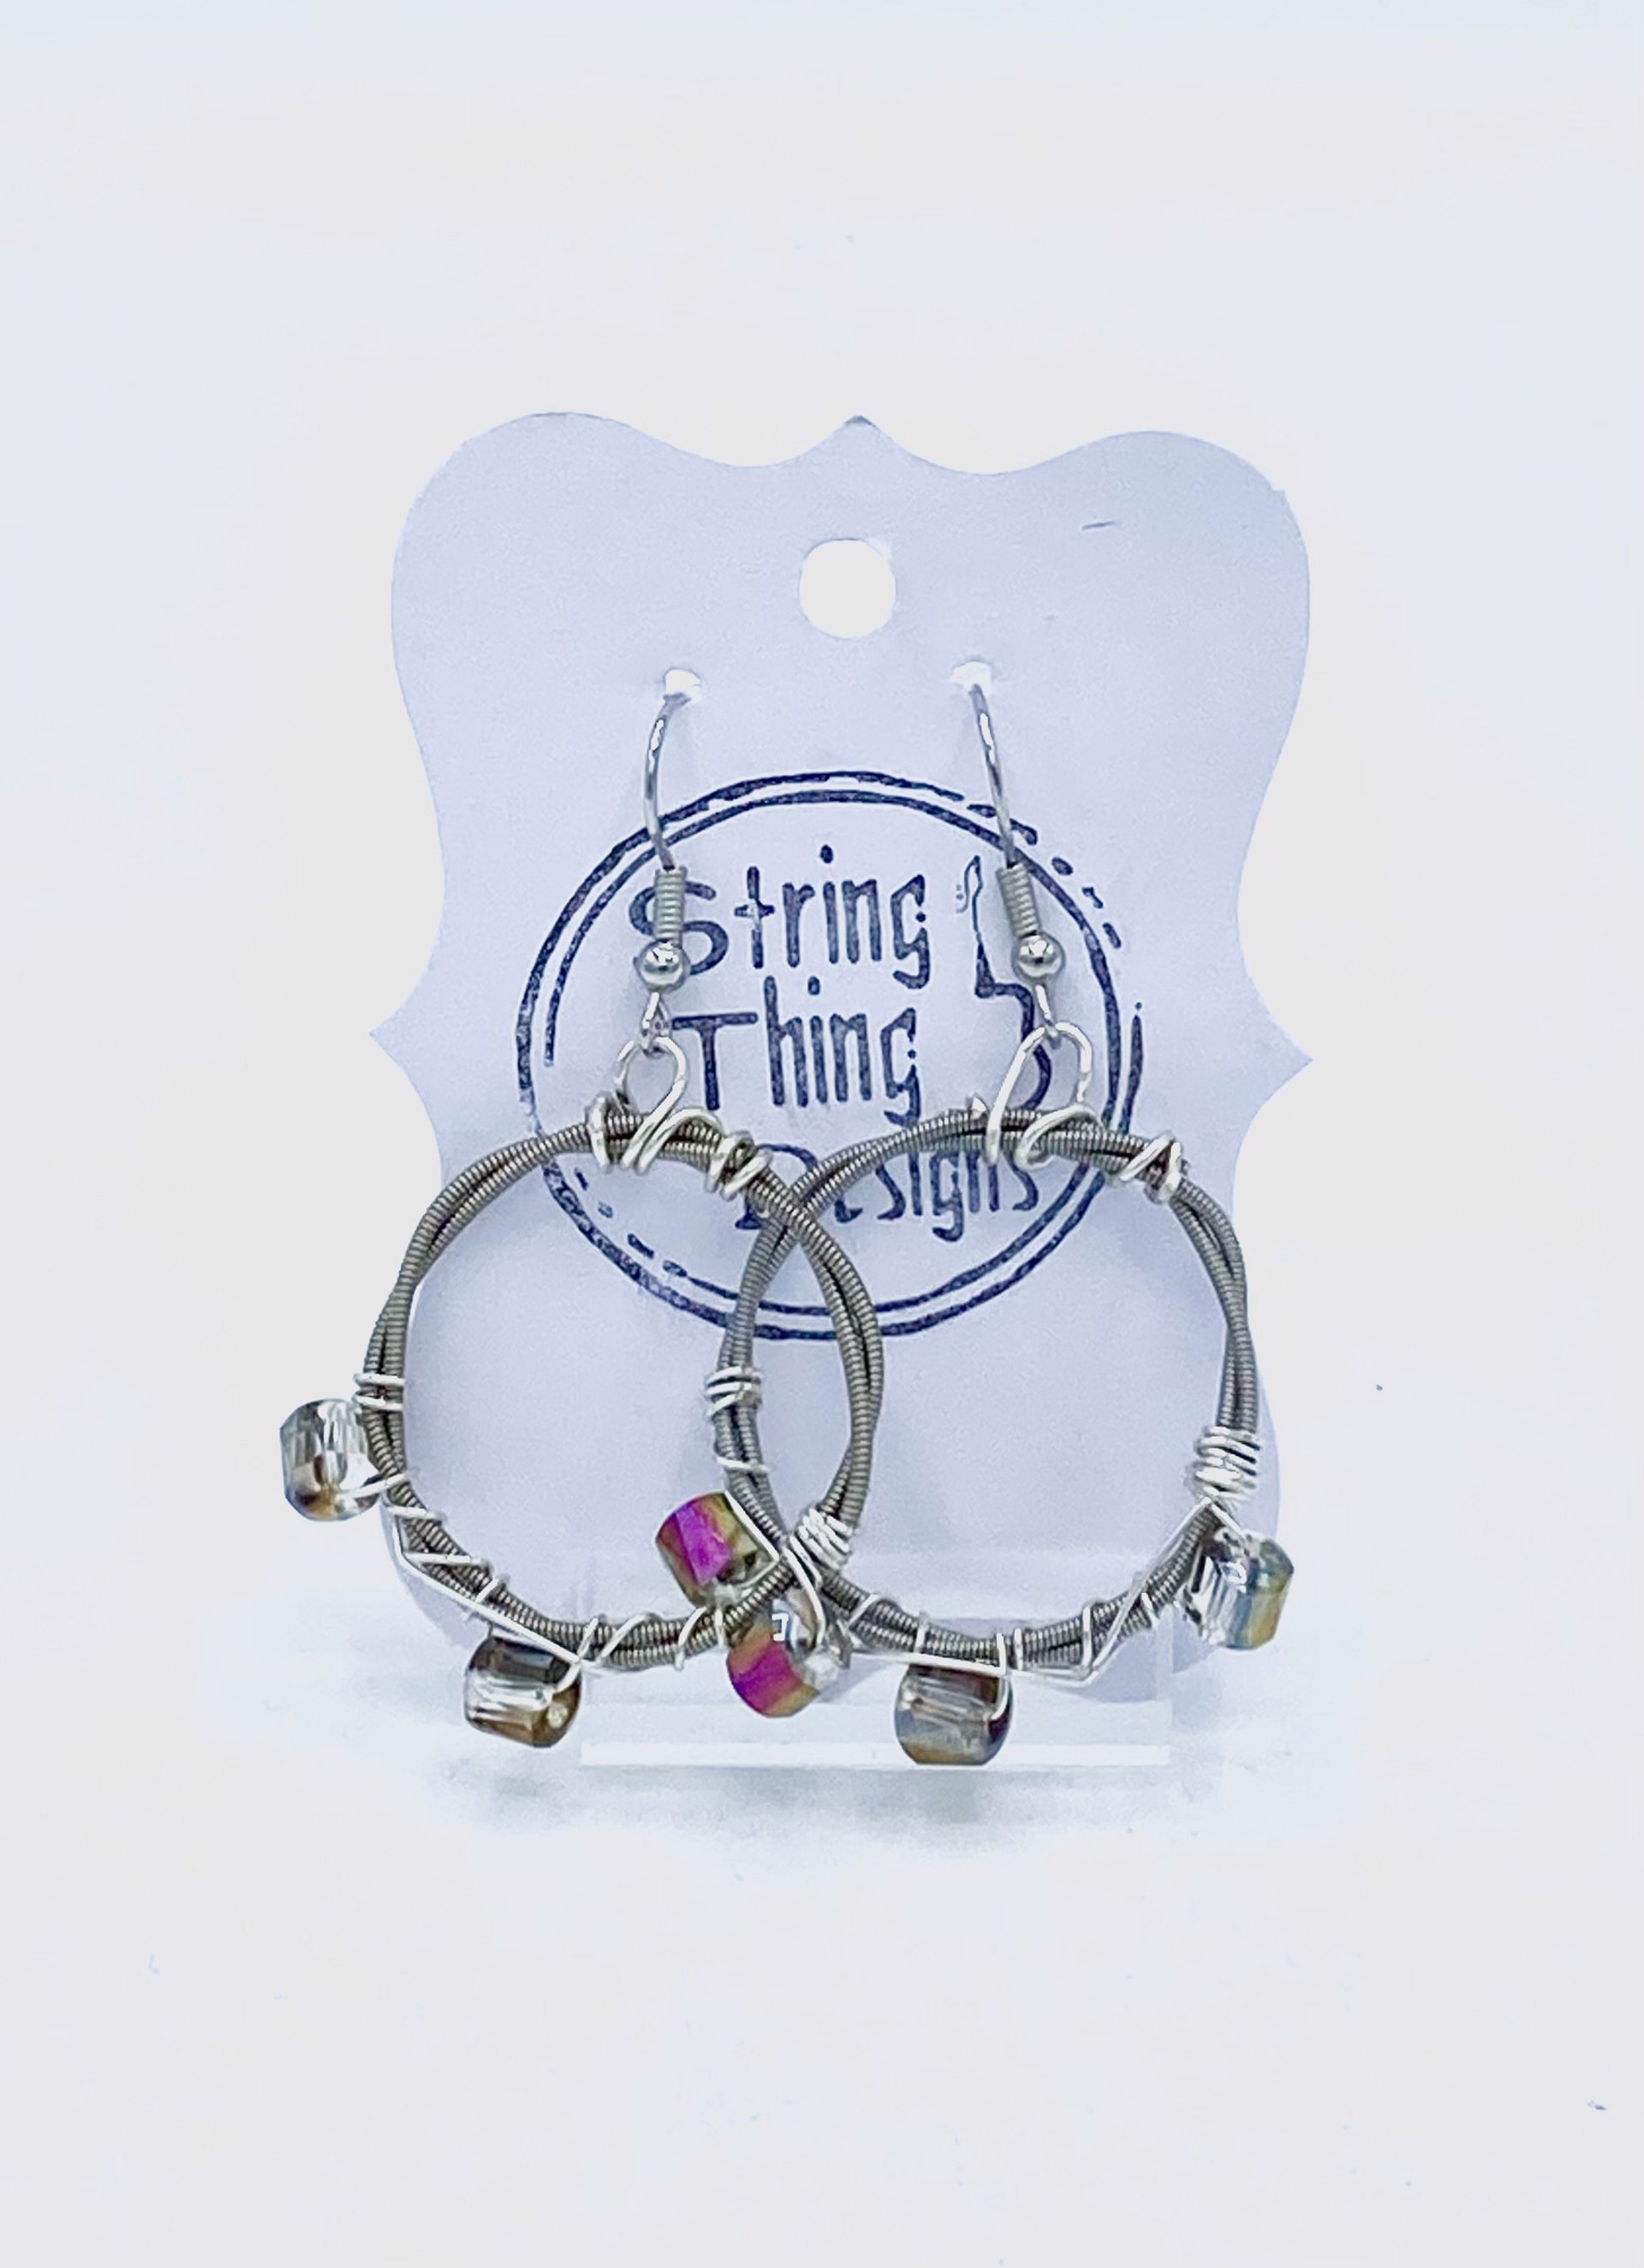 Guitar String Round Beaded Earrings by String Thing Designs